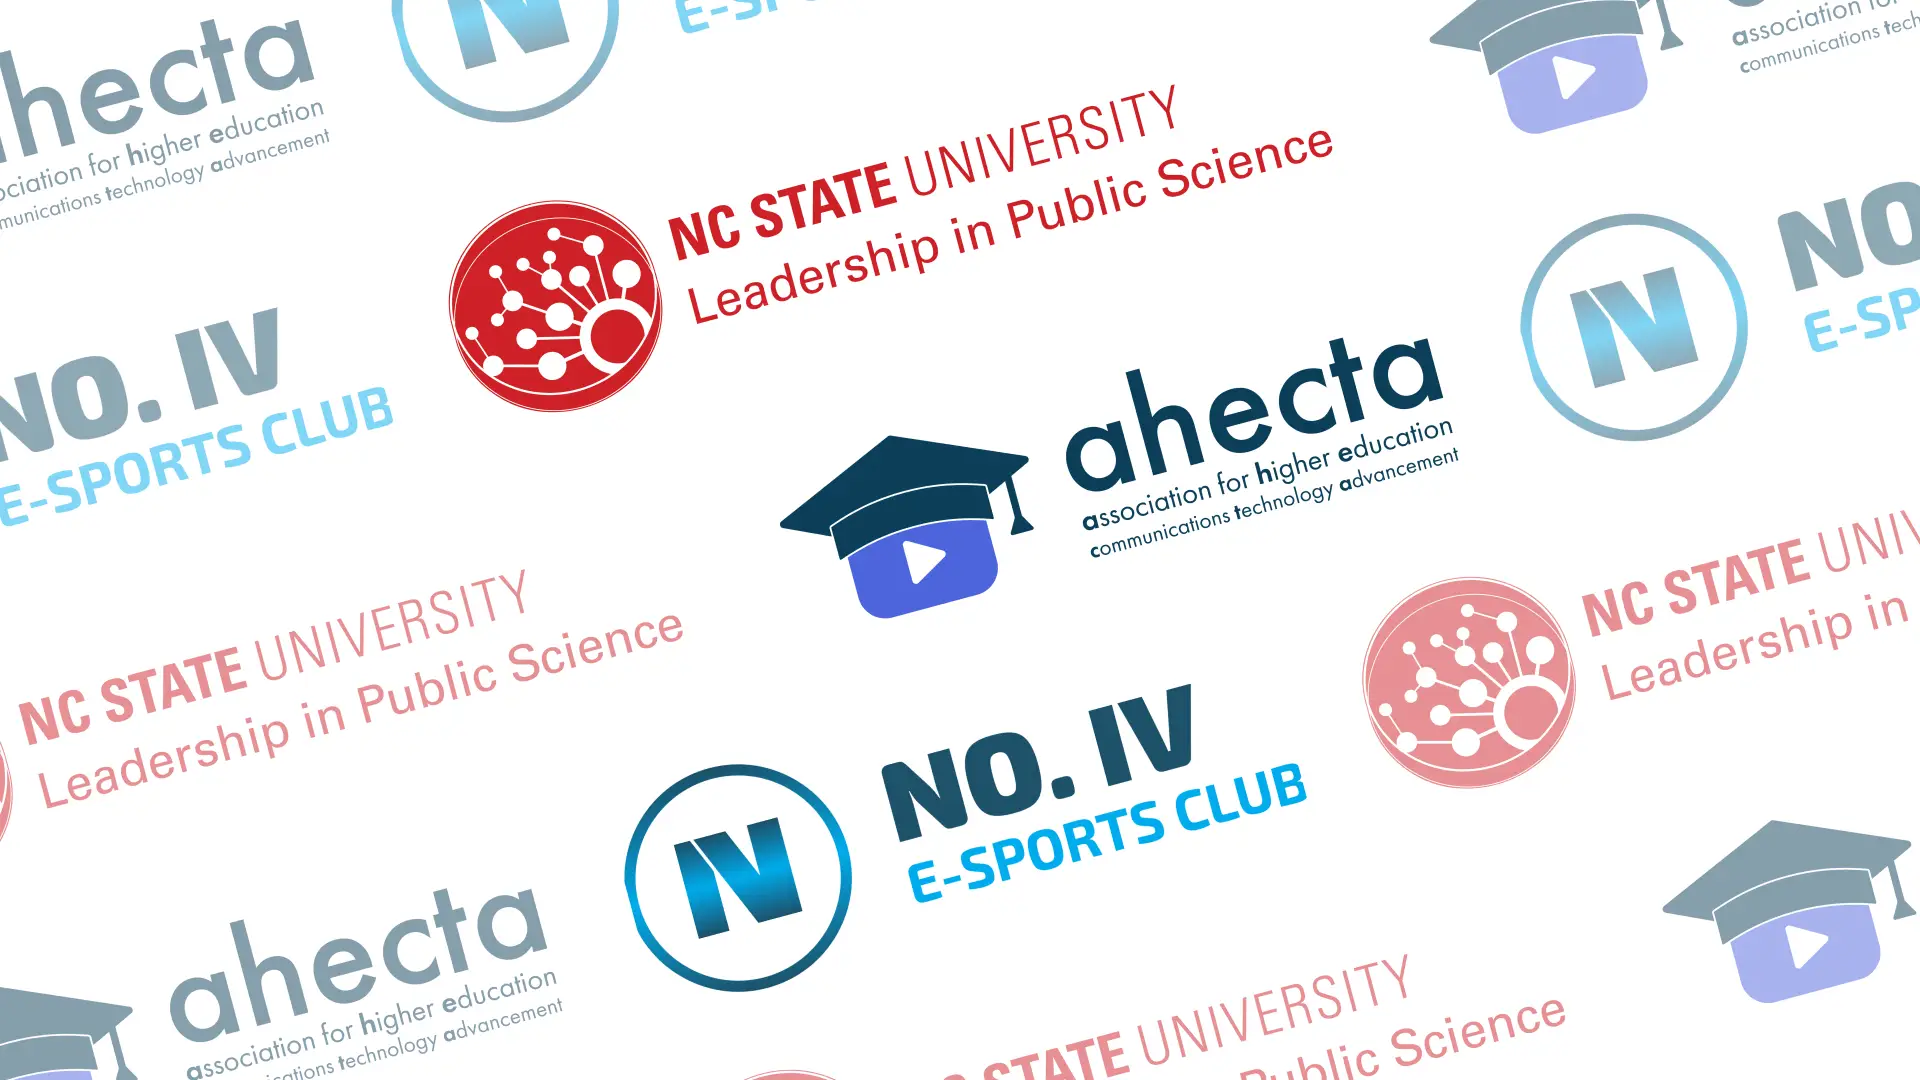 Logos for NCSU's Leadership in Public Science, AHECTA, and No. IV E-sports Club